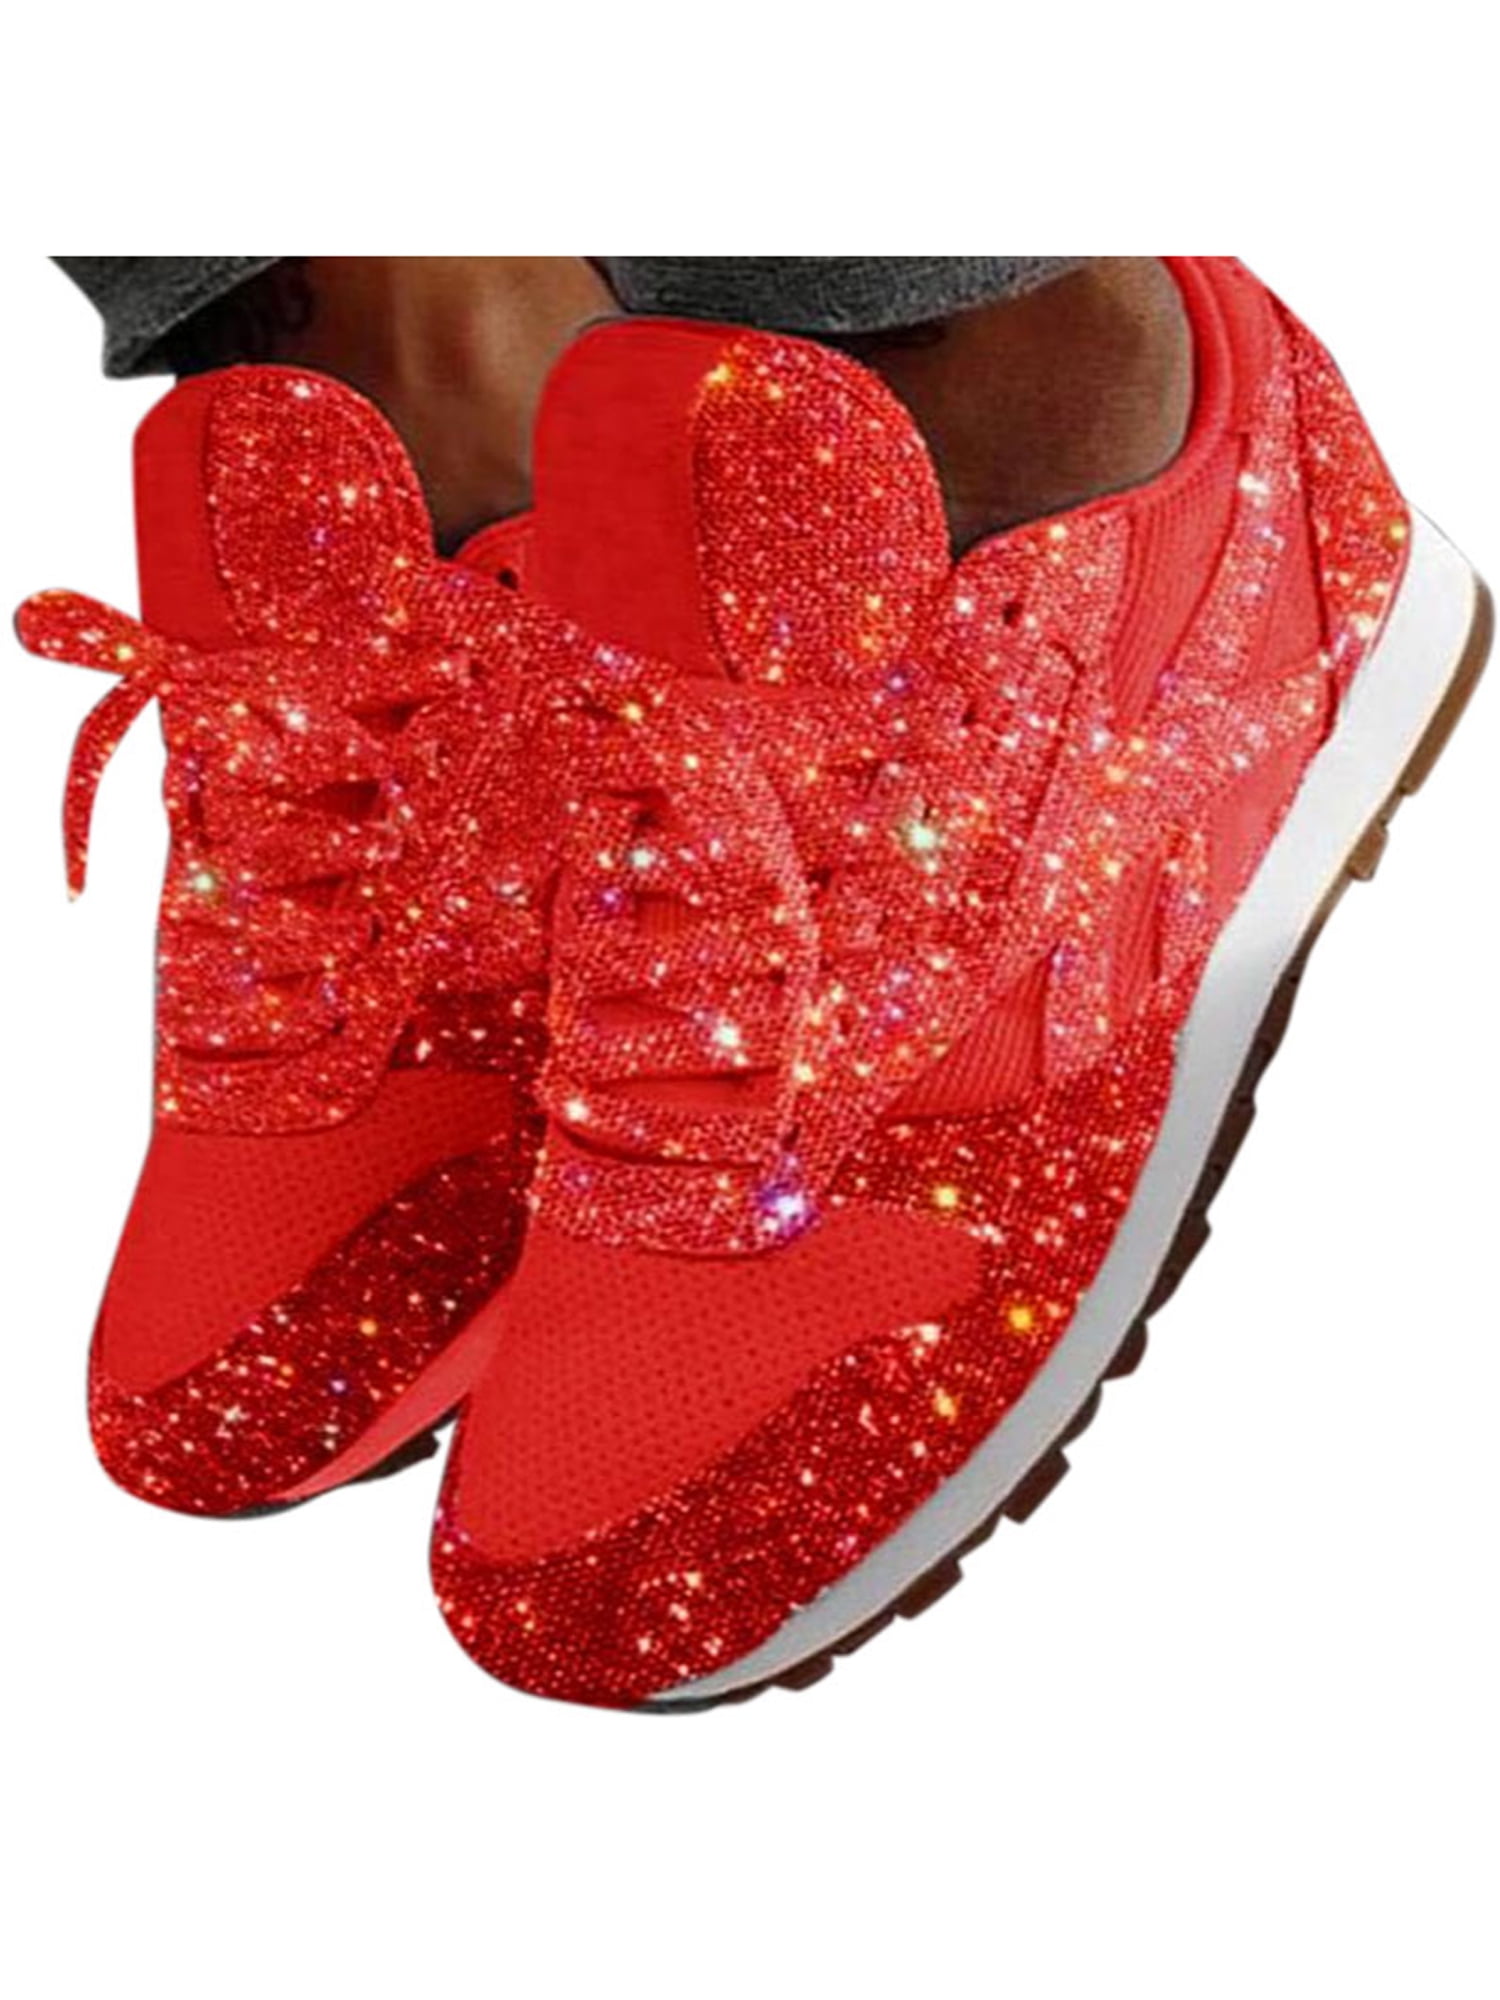 Womens Sequin Glitter Lace Up Fashion Shoes Sport Jogger Smart Athletic Sneakers 